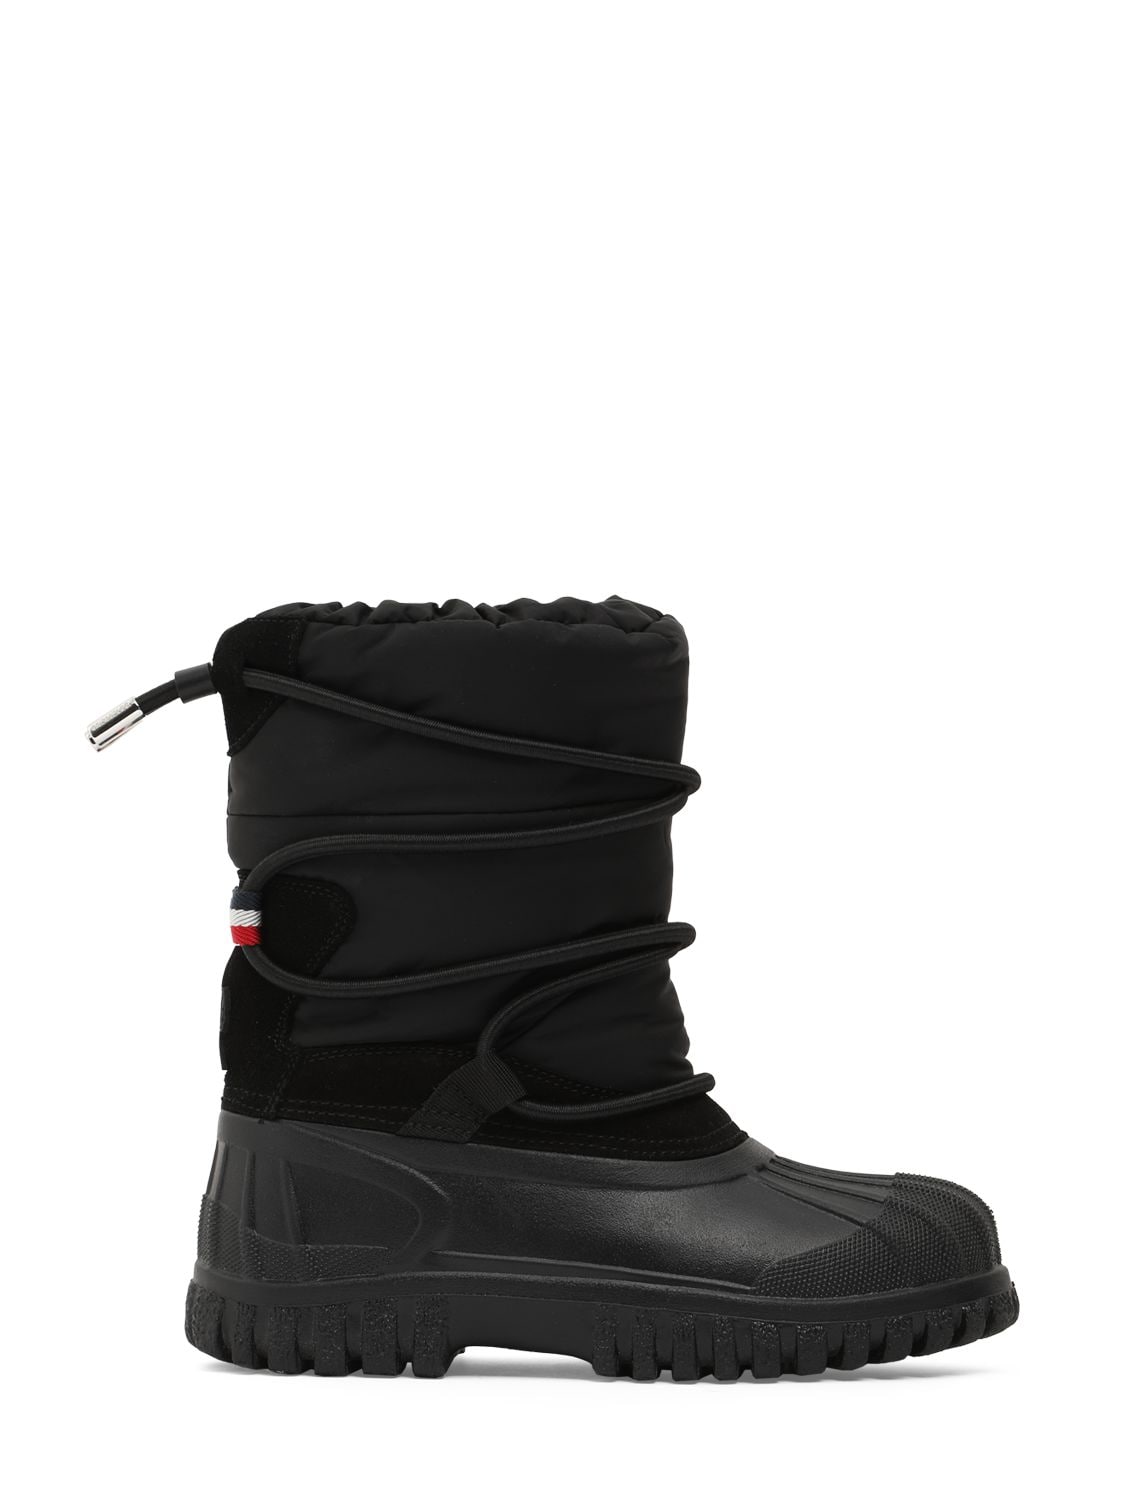 Moncler Grenoble Kids' Chris Tech & Leather Snow Boots In Black